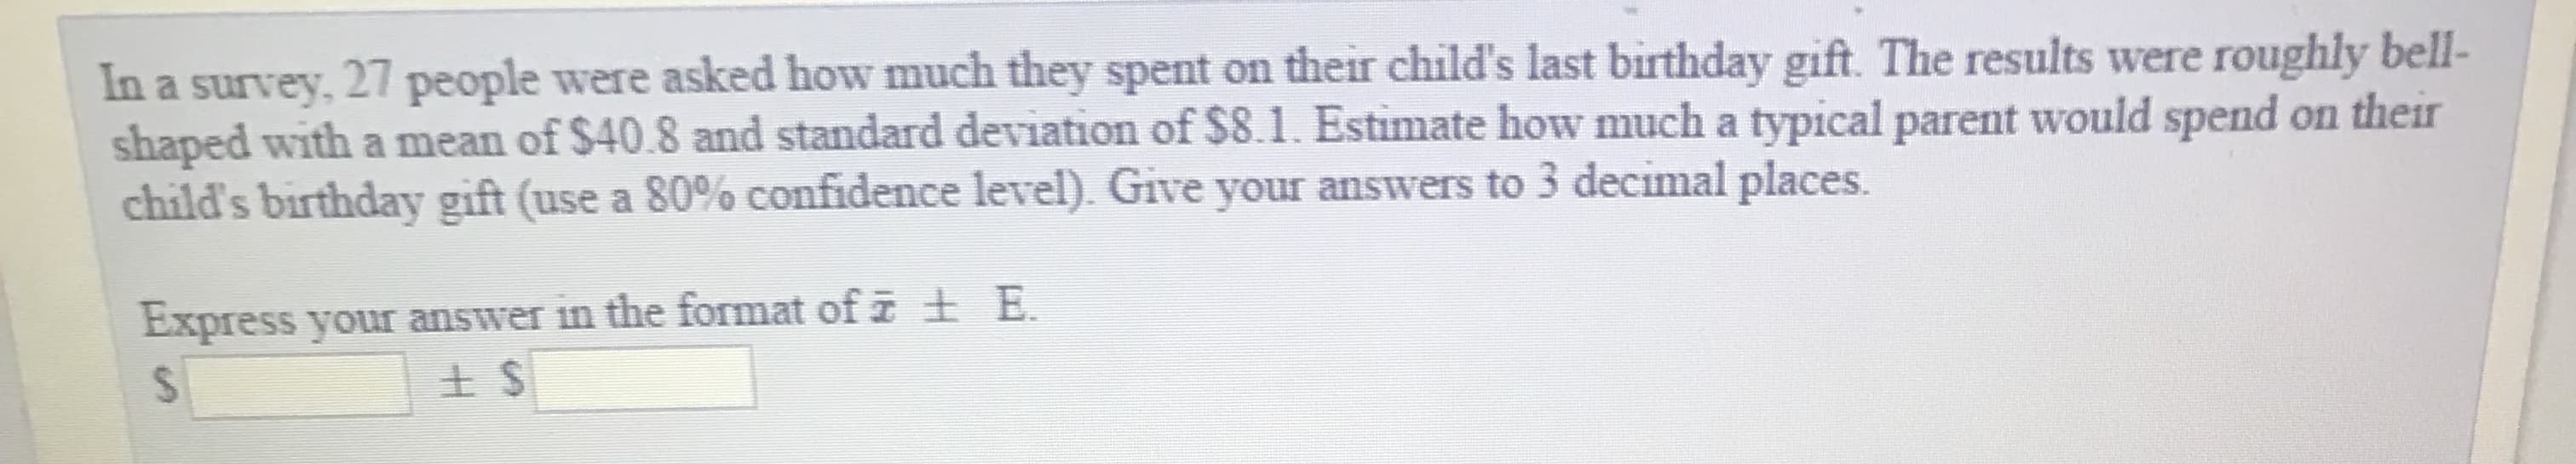 In a survey, 27 people were asked how much they spent on their child's last birthday gift. The results were roughly bell-
shaped with a mean of $40.8 and standard deviation of $8.1. Estimate how much a typical parent would spend on their
child's birthday gift (use a 80% confidence level) Give your answers to 3 decimal places
Express your answer in the format of a B.
